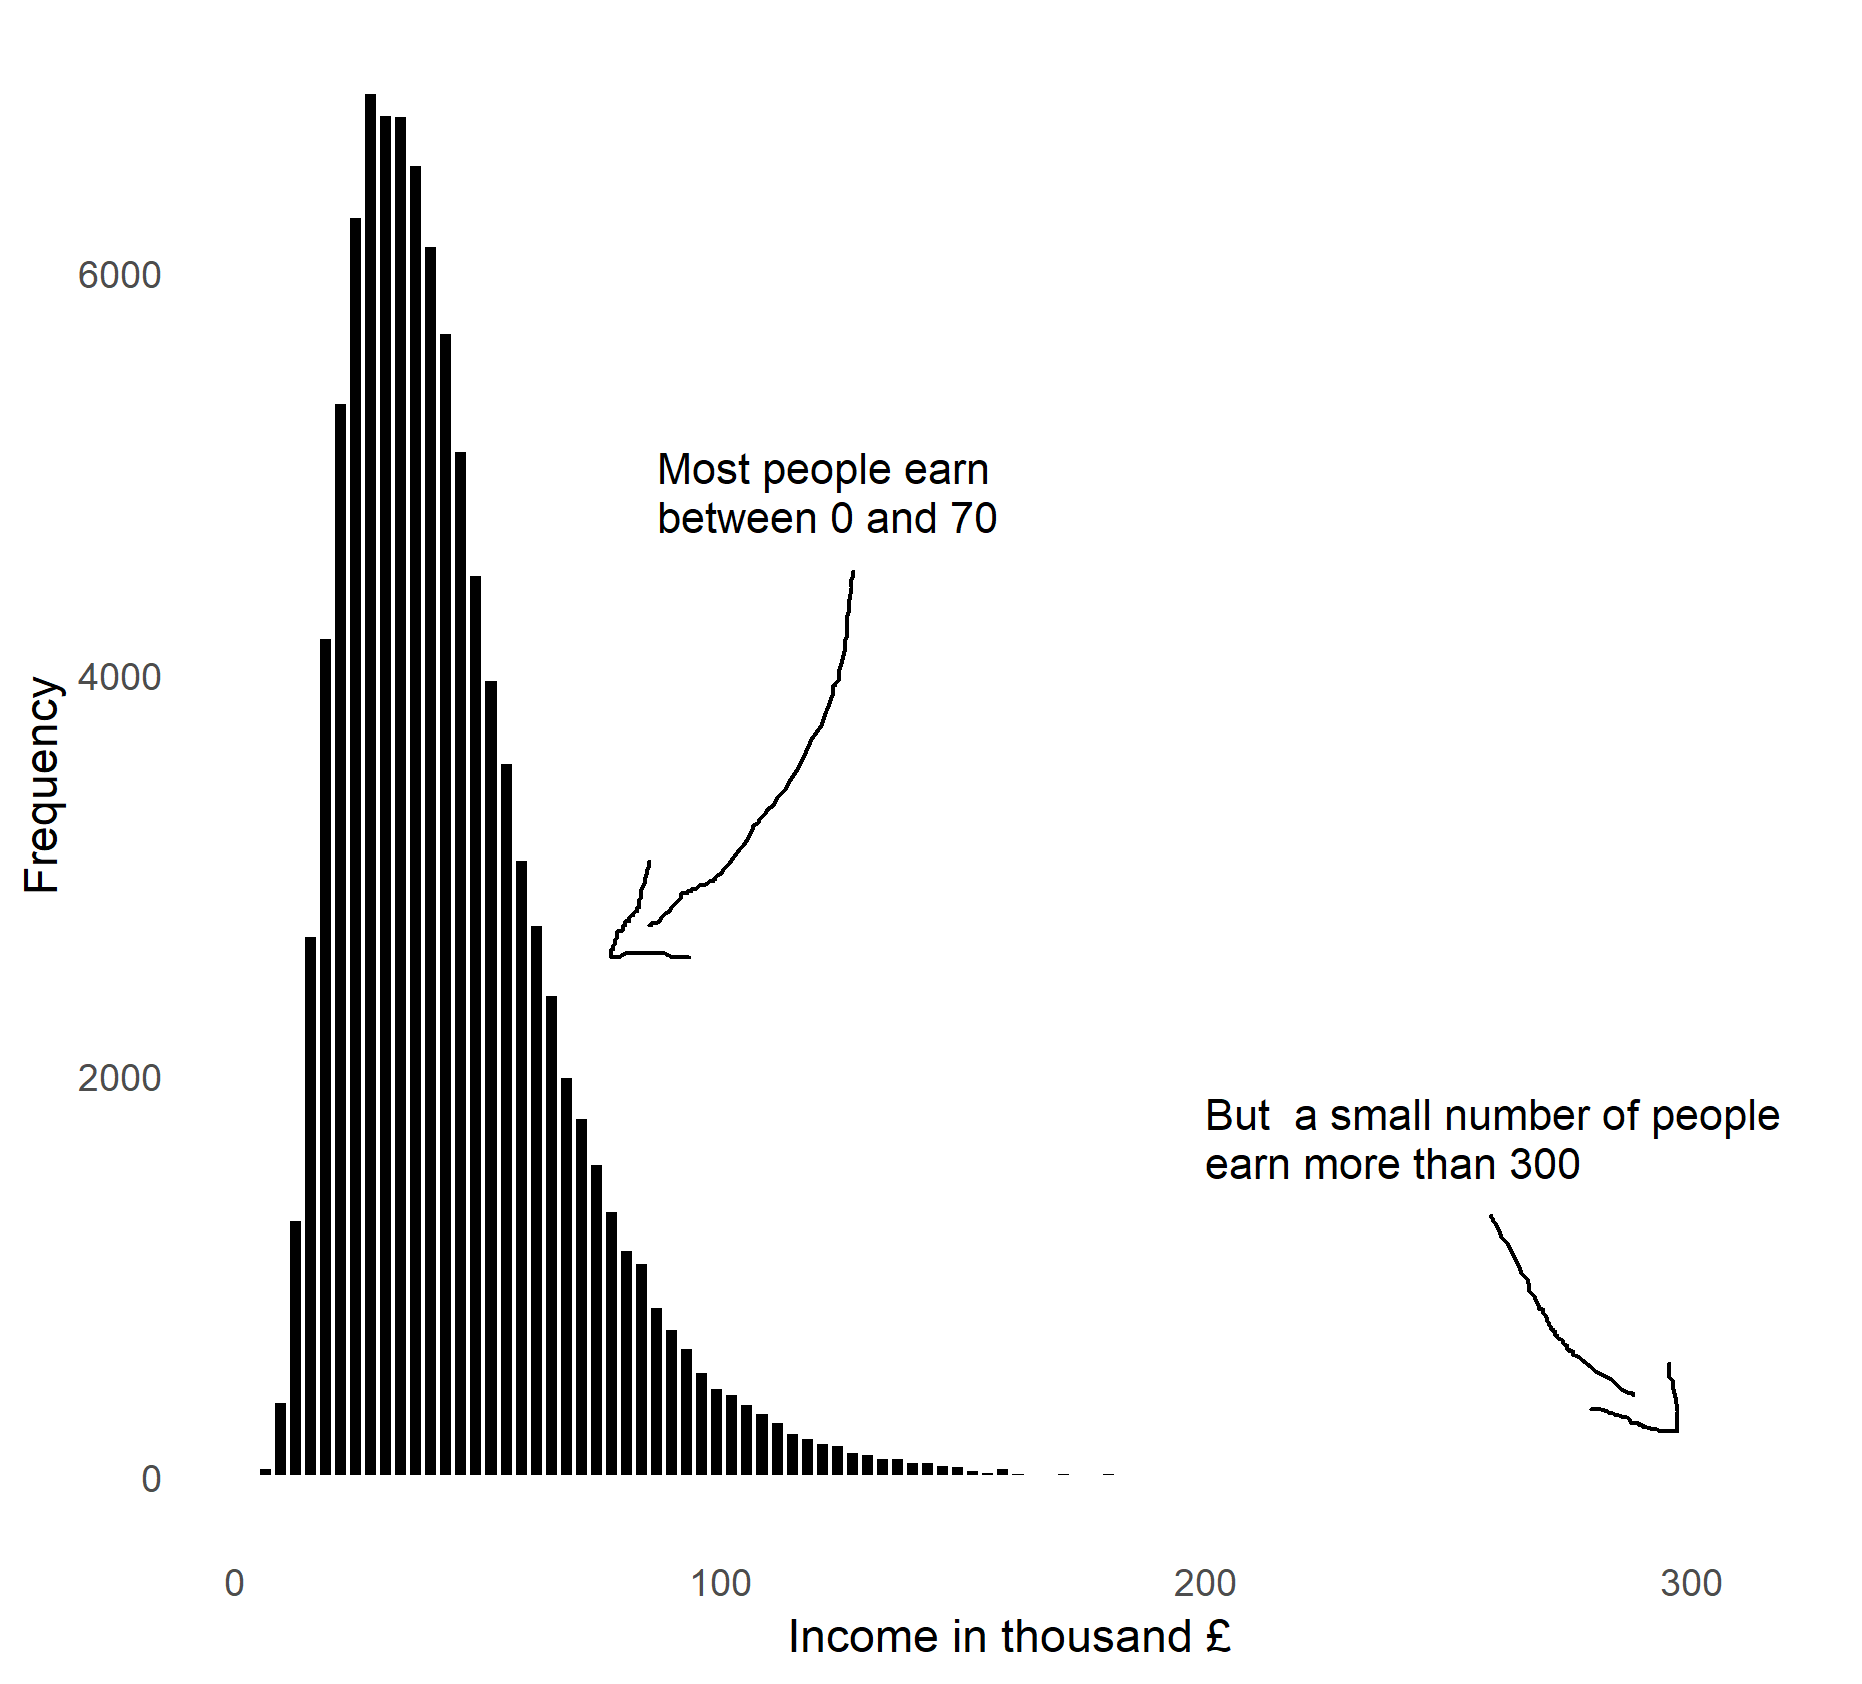 The distribution of income. Data is simulated.